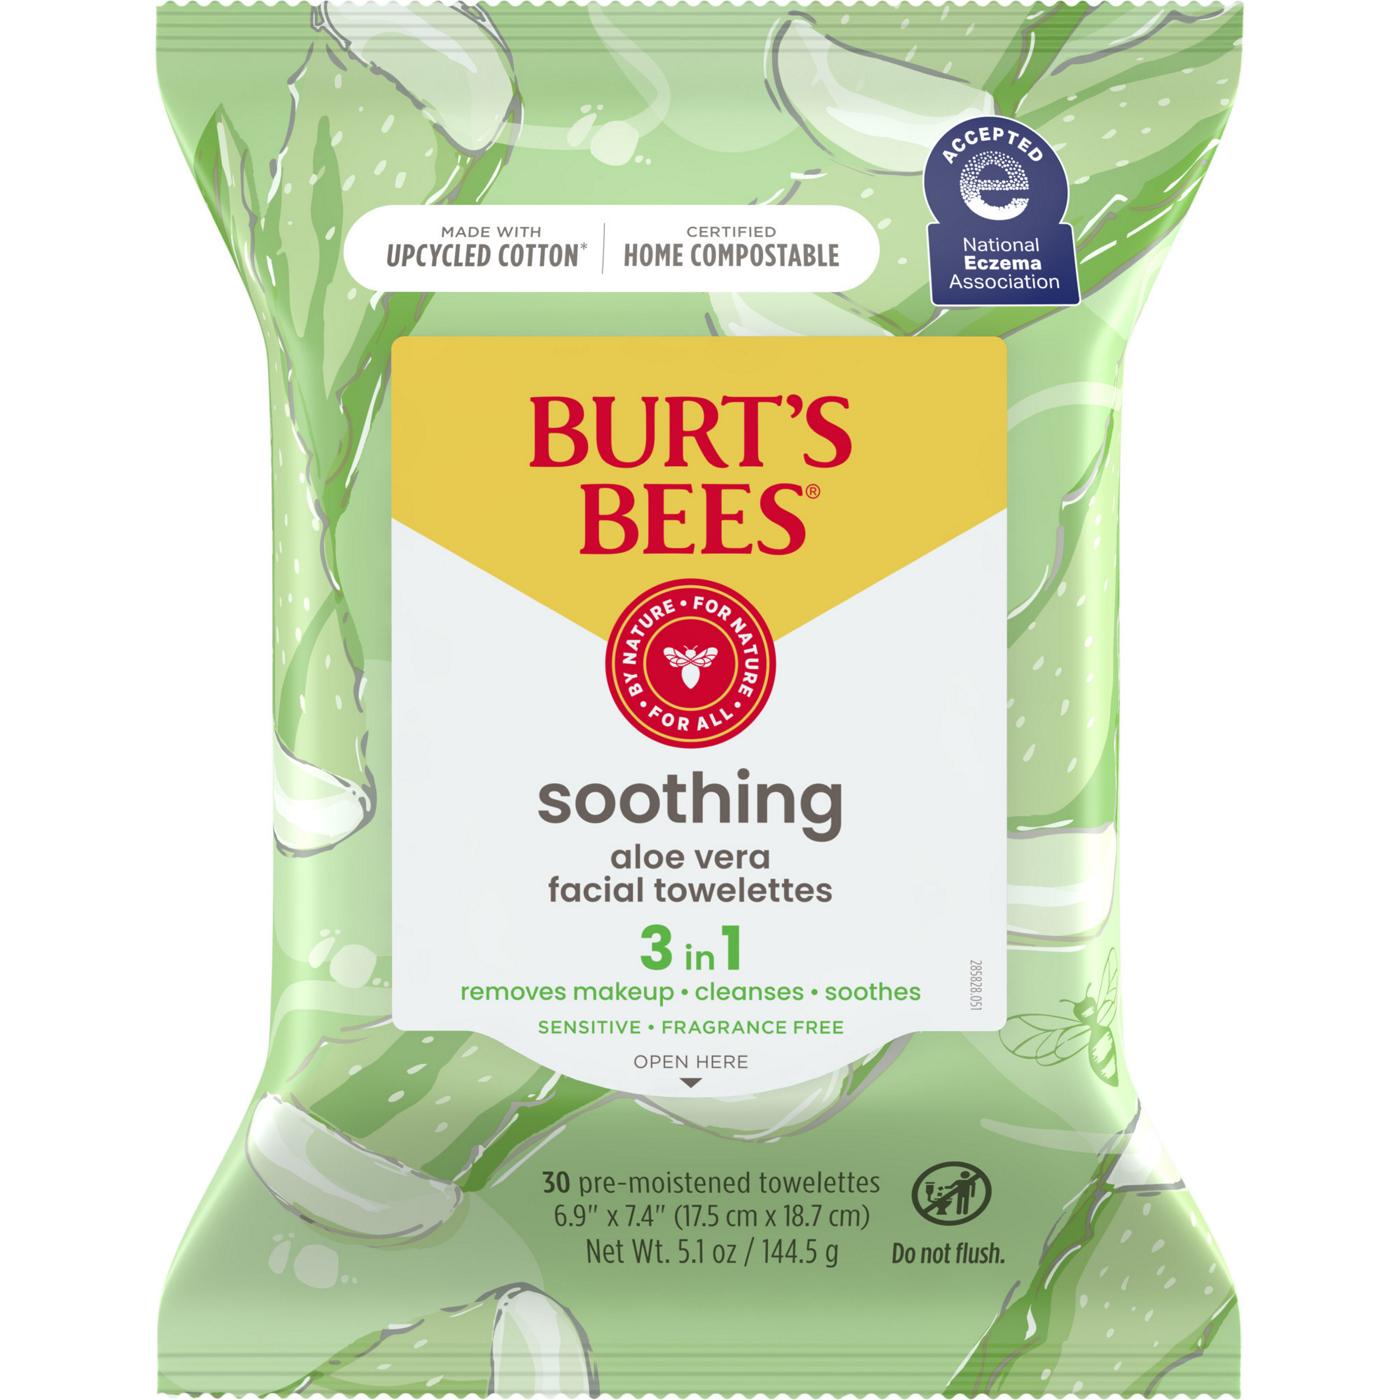 Burt's Bees Soothing Facial Towelettes - Aloe Vera; image 1 of 13